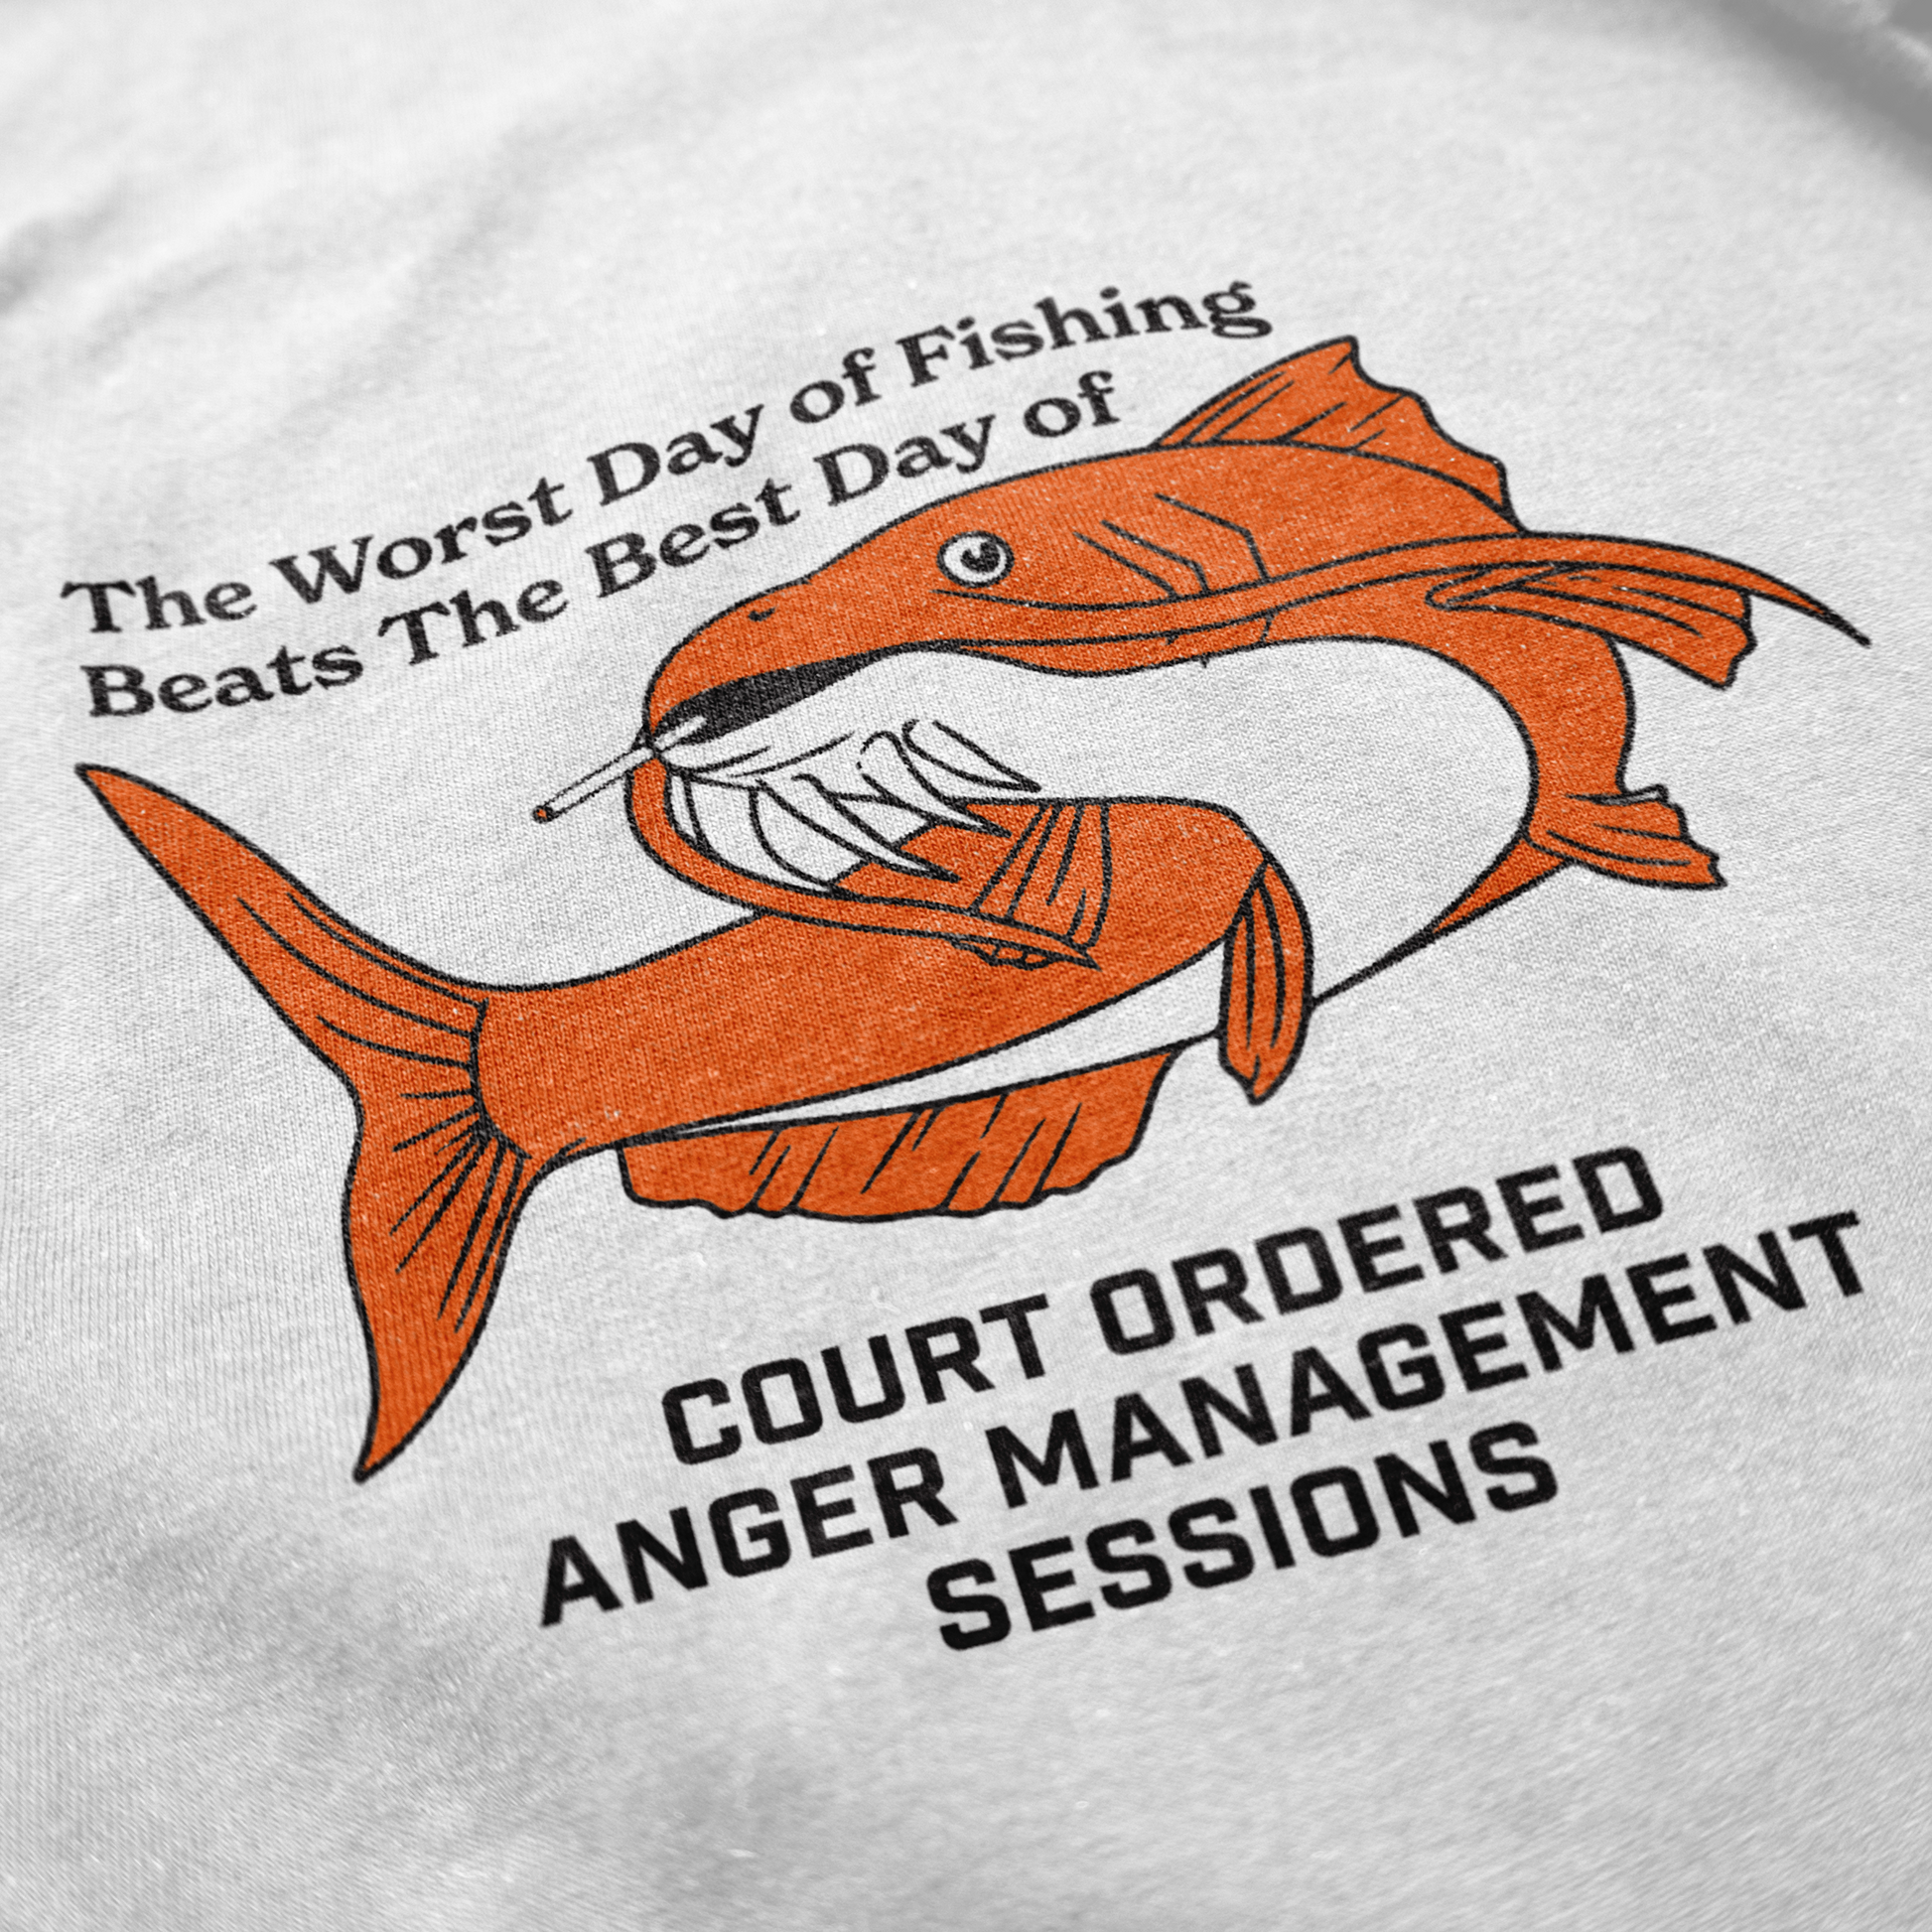 Fishing Is My Anger Management, Fishing T-Shirt, Funny Fishing Shirt sold  by Cleaner way to go Llc, SKU 40038646